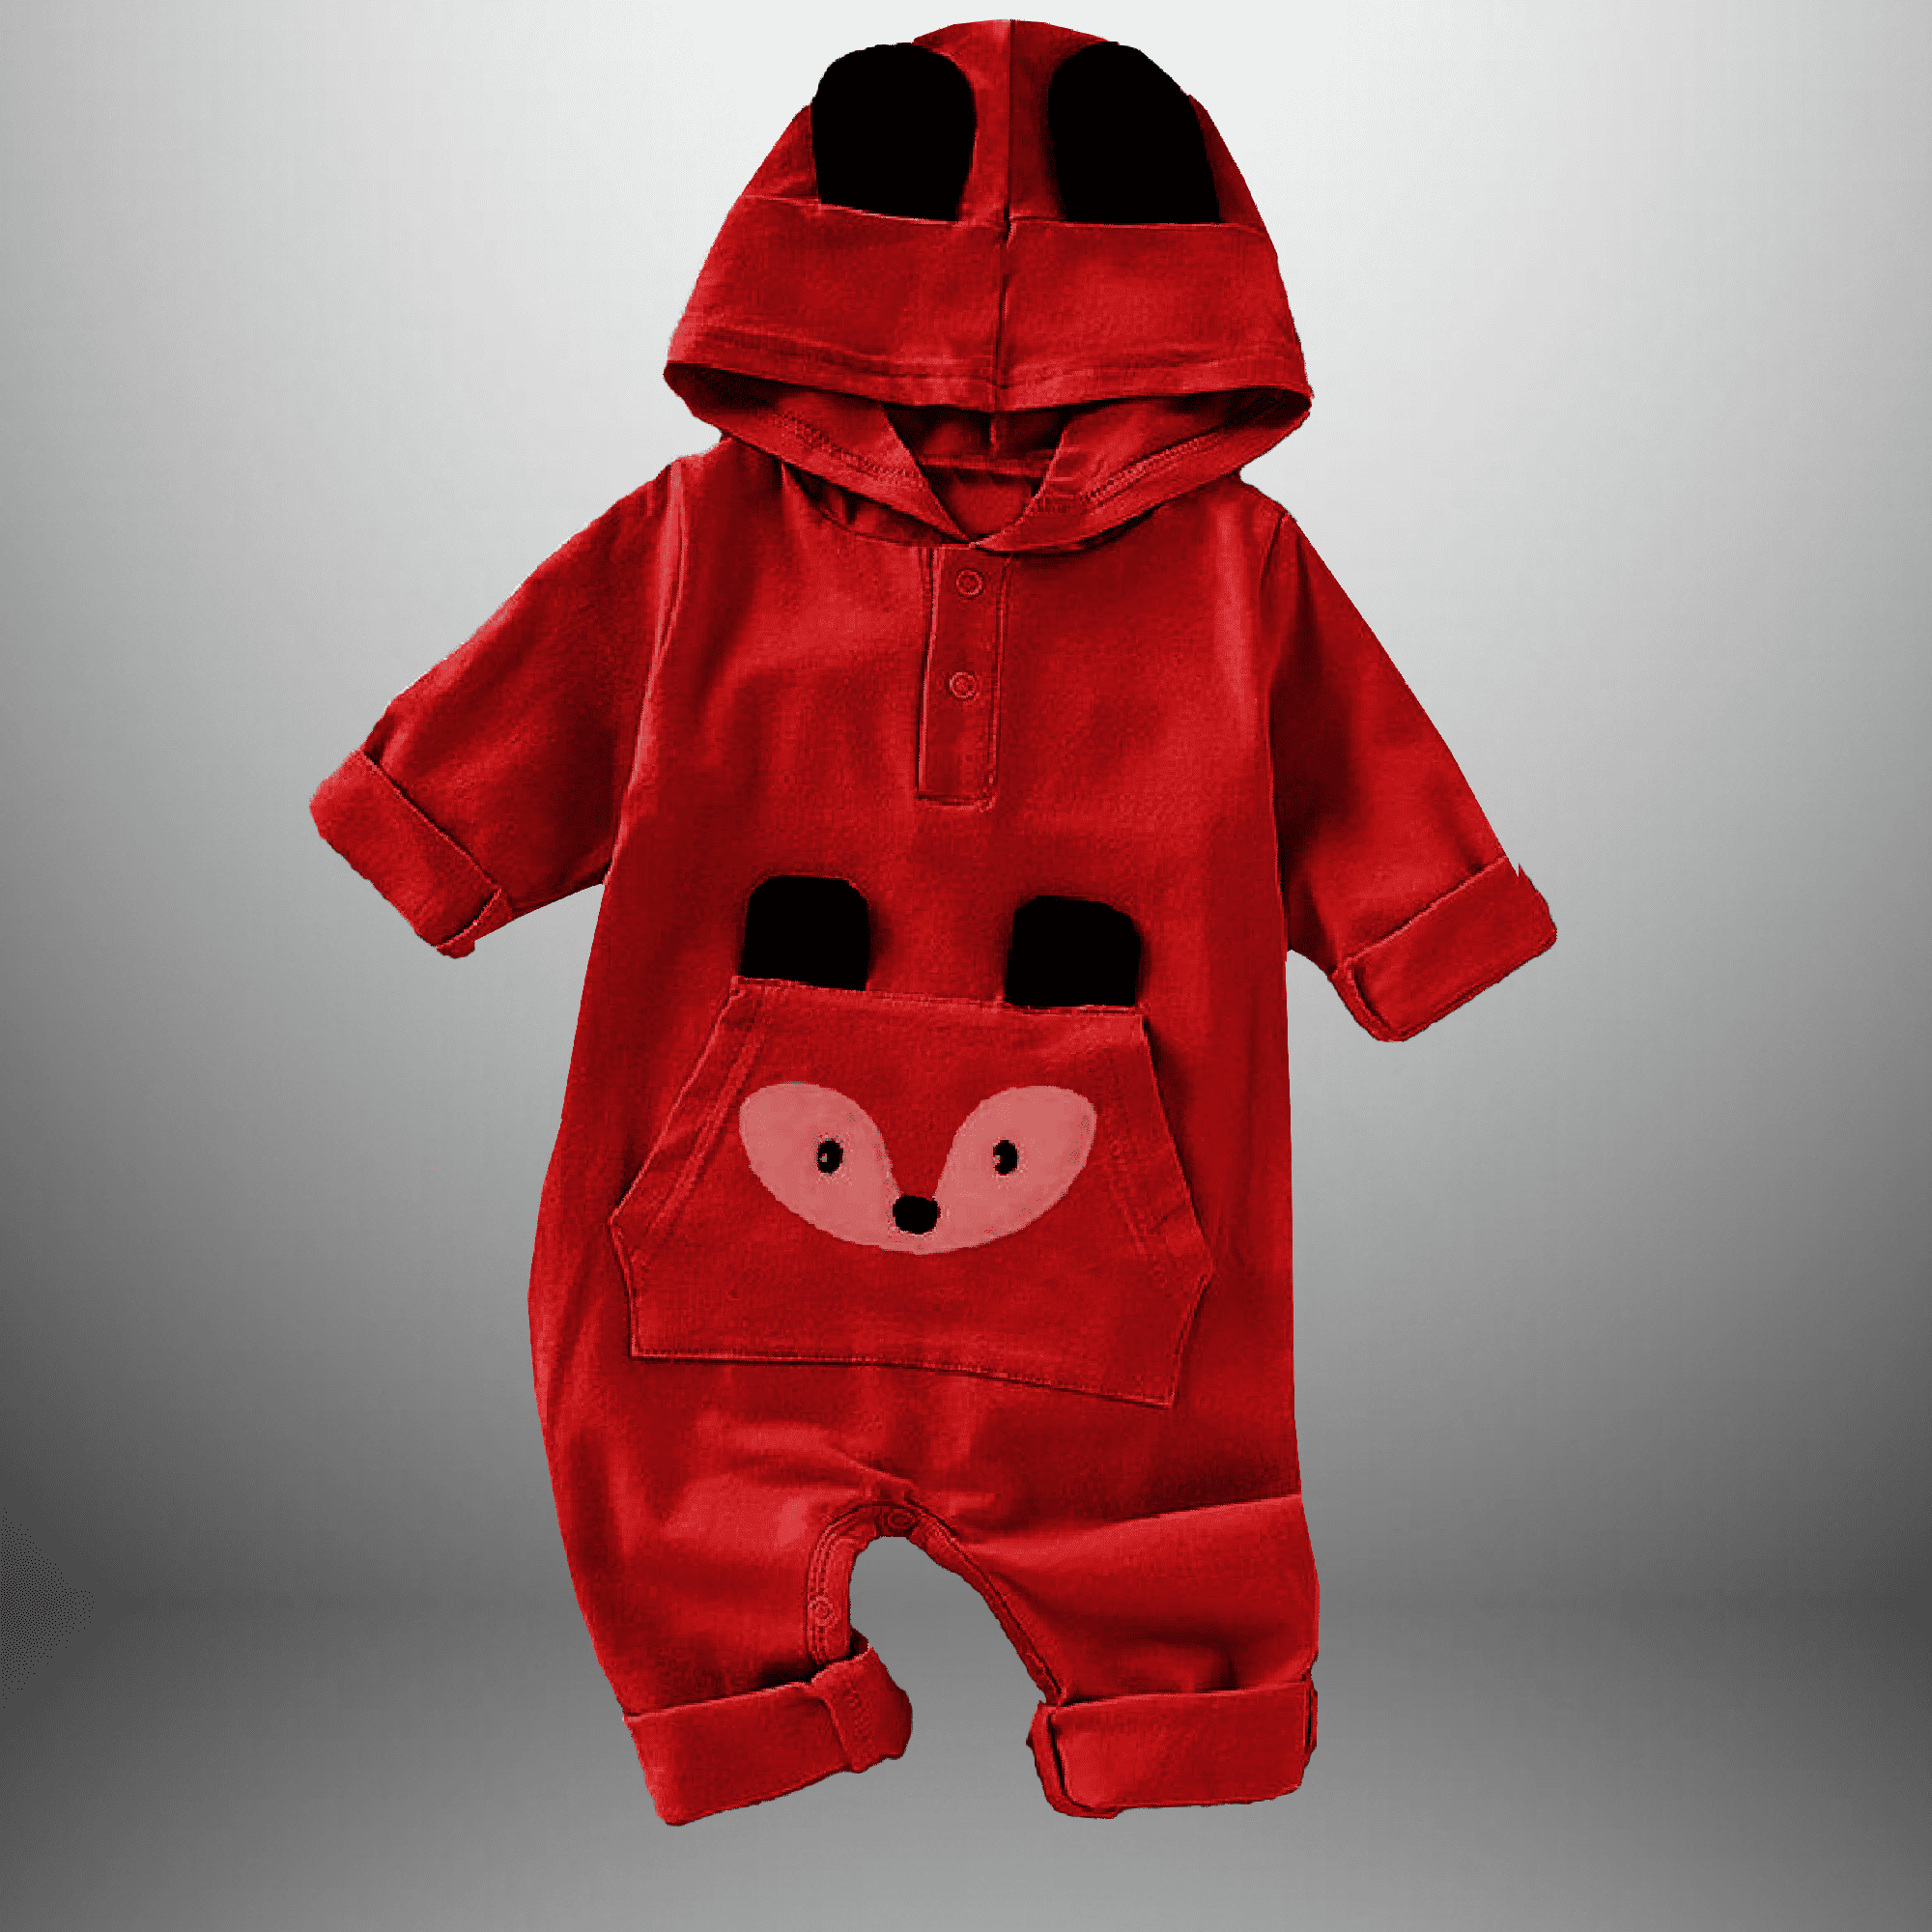 Toddler's Red hooded Romper with front pocket-RKFCTT103